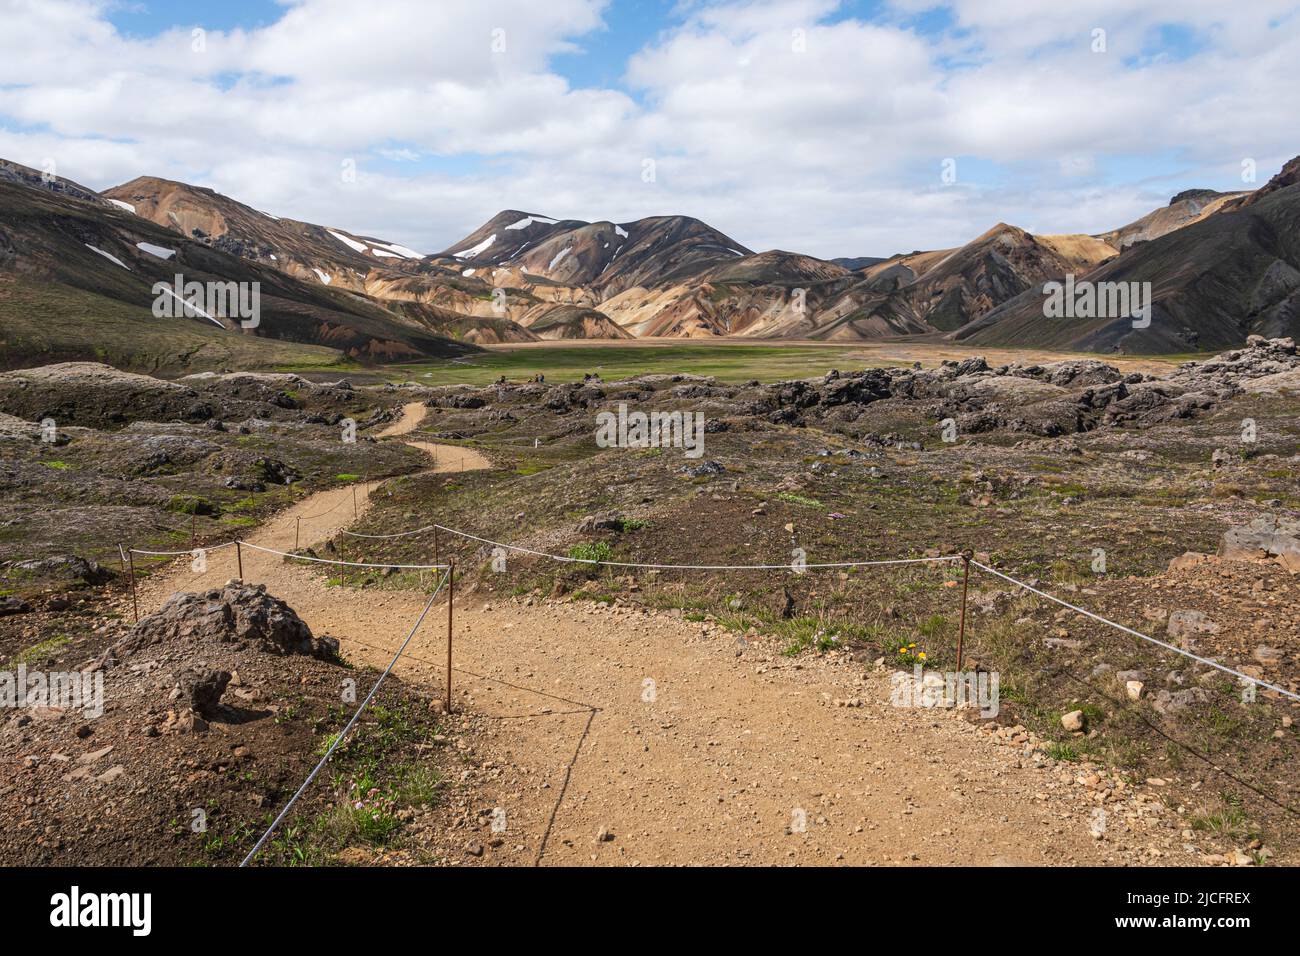 Laugavegur hiking trail is the most famous multi-day trekking tour in Iceland. Landscape photo from the area around Landmannalaugar, starting point of the long-distance hiking trail in the highlands of Iceland. Marked hiking trail. Stock Photo